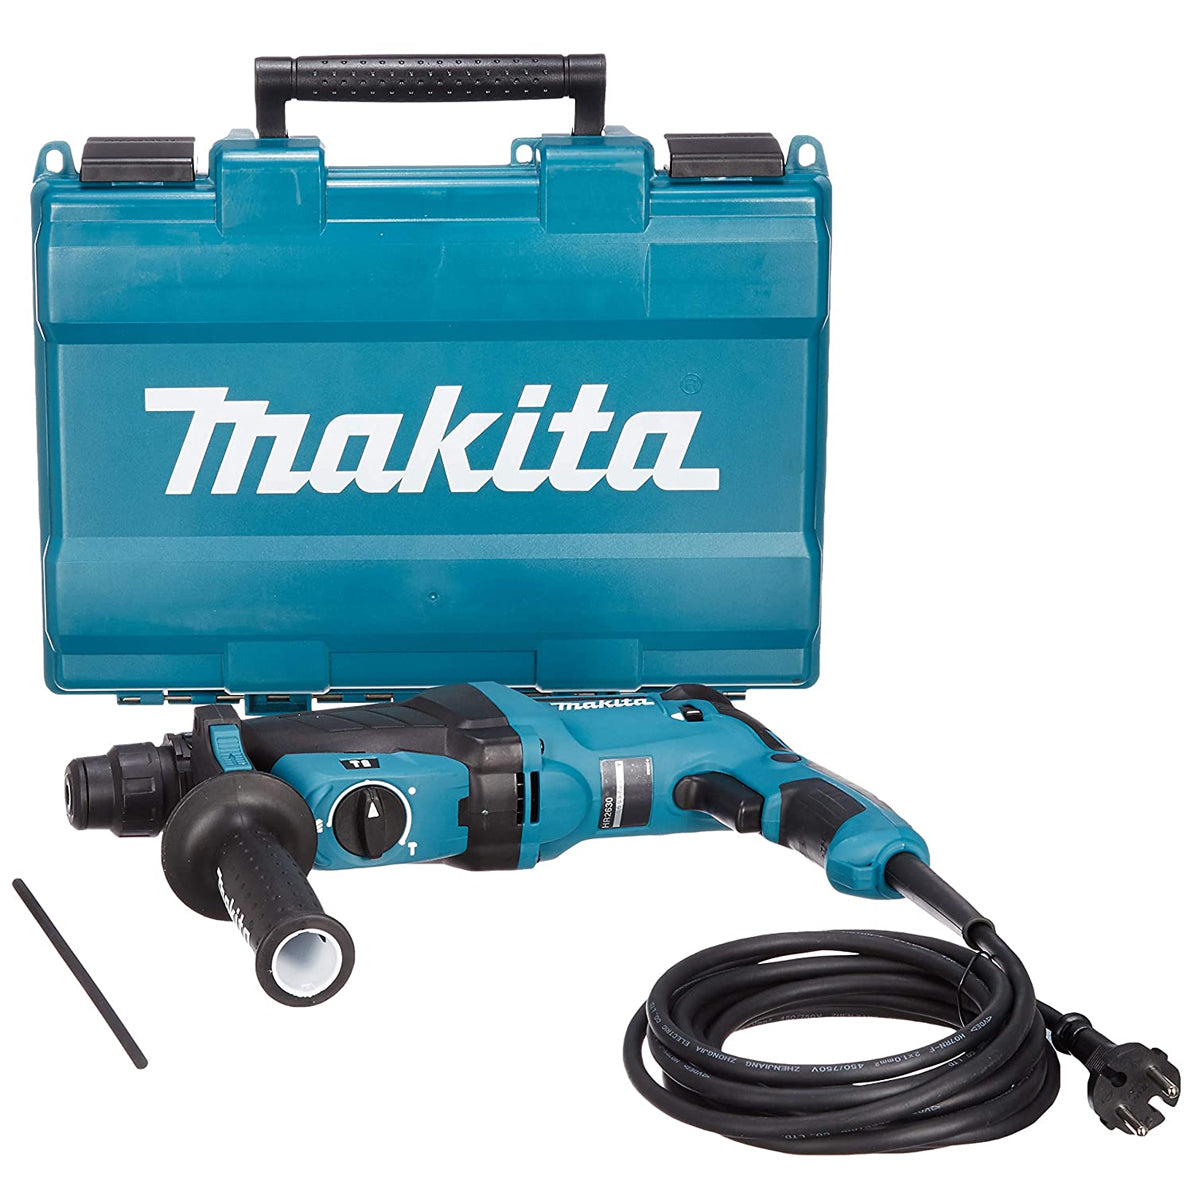 Makita HR2630/2 3 Mode SDS+ Rotary Hammer Drill 240V Replaces HR2610